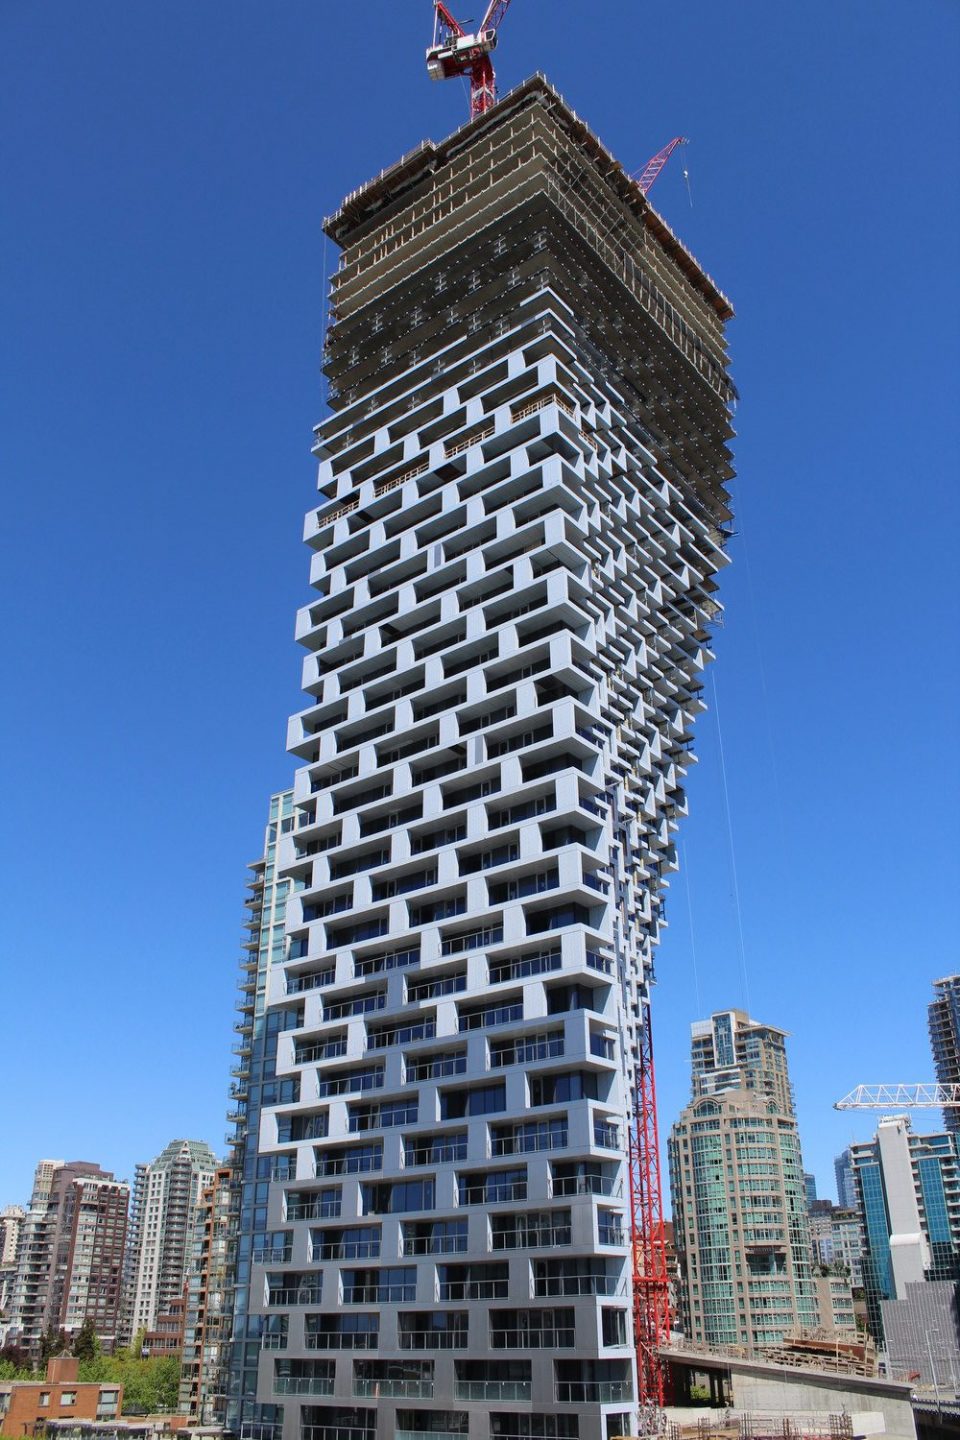 Vancouver House construction photos May 2018